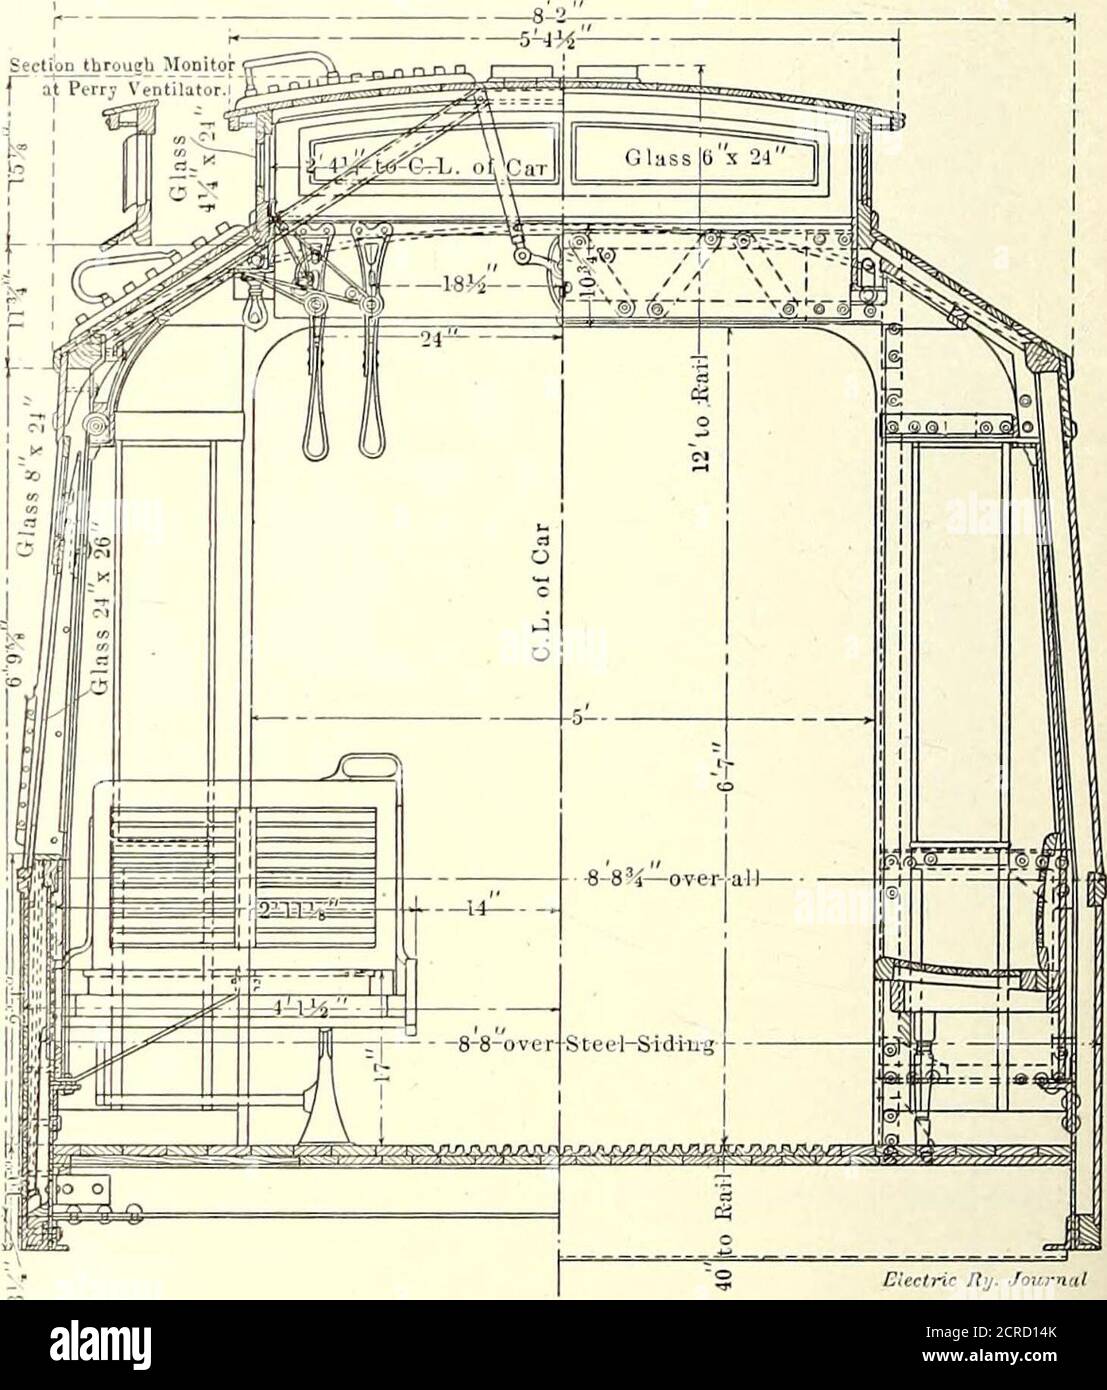 . Electric railway journal . h two sets of double-leaf folding doors openingoutward, one set toward the car body and the other towardthe vestibule corner posts. These folding doors are operatedmanually by a device specially designed by the Pay-WithinCar Company, with operating levers located under the plat-forms, and are so constructed as to enable the conductor tooperate the doors and steps for either side of the platformfrom his fixed prepayment position. The motormans controlis similarly arranged so that he can operate both sets of doorsand steps without moving from his position. The cars a Stock Photo